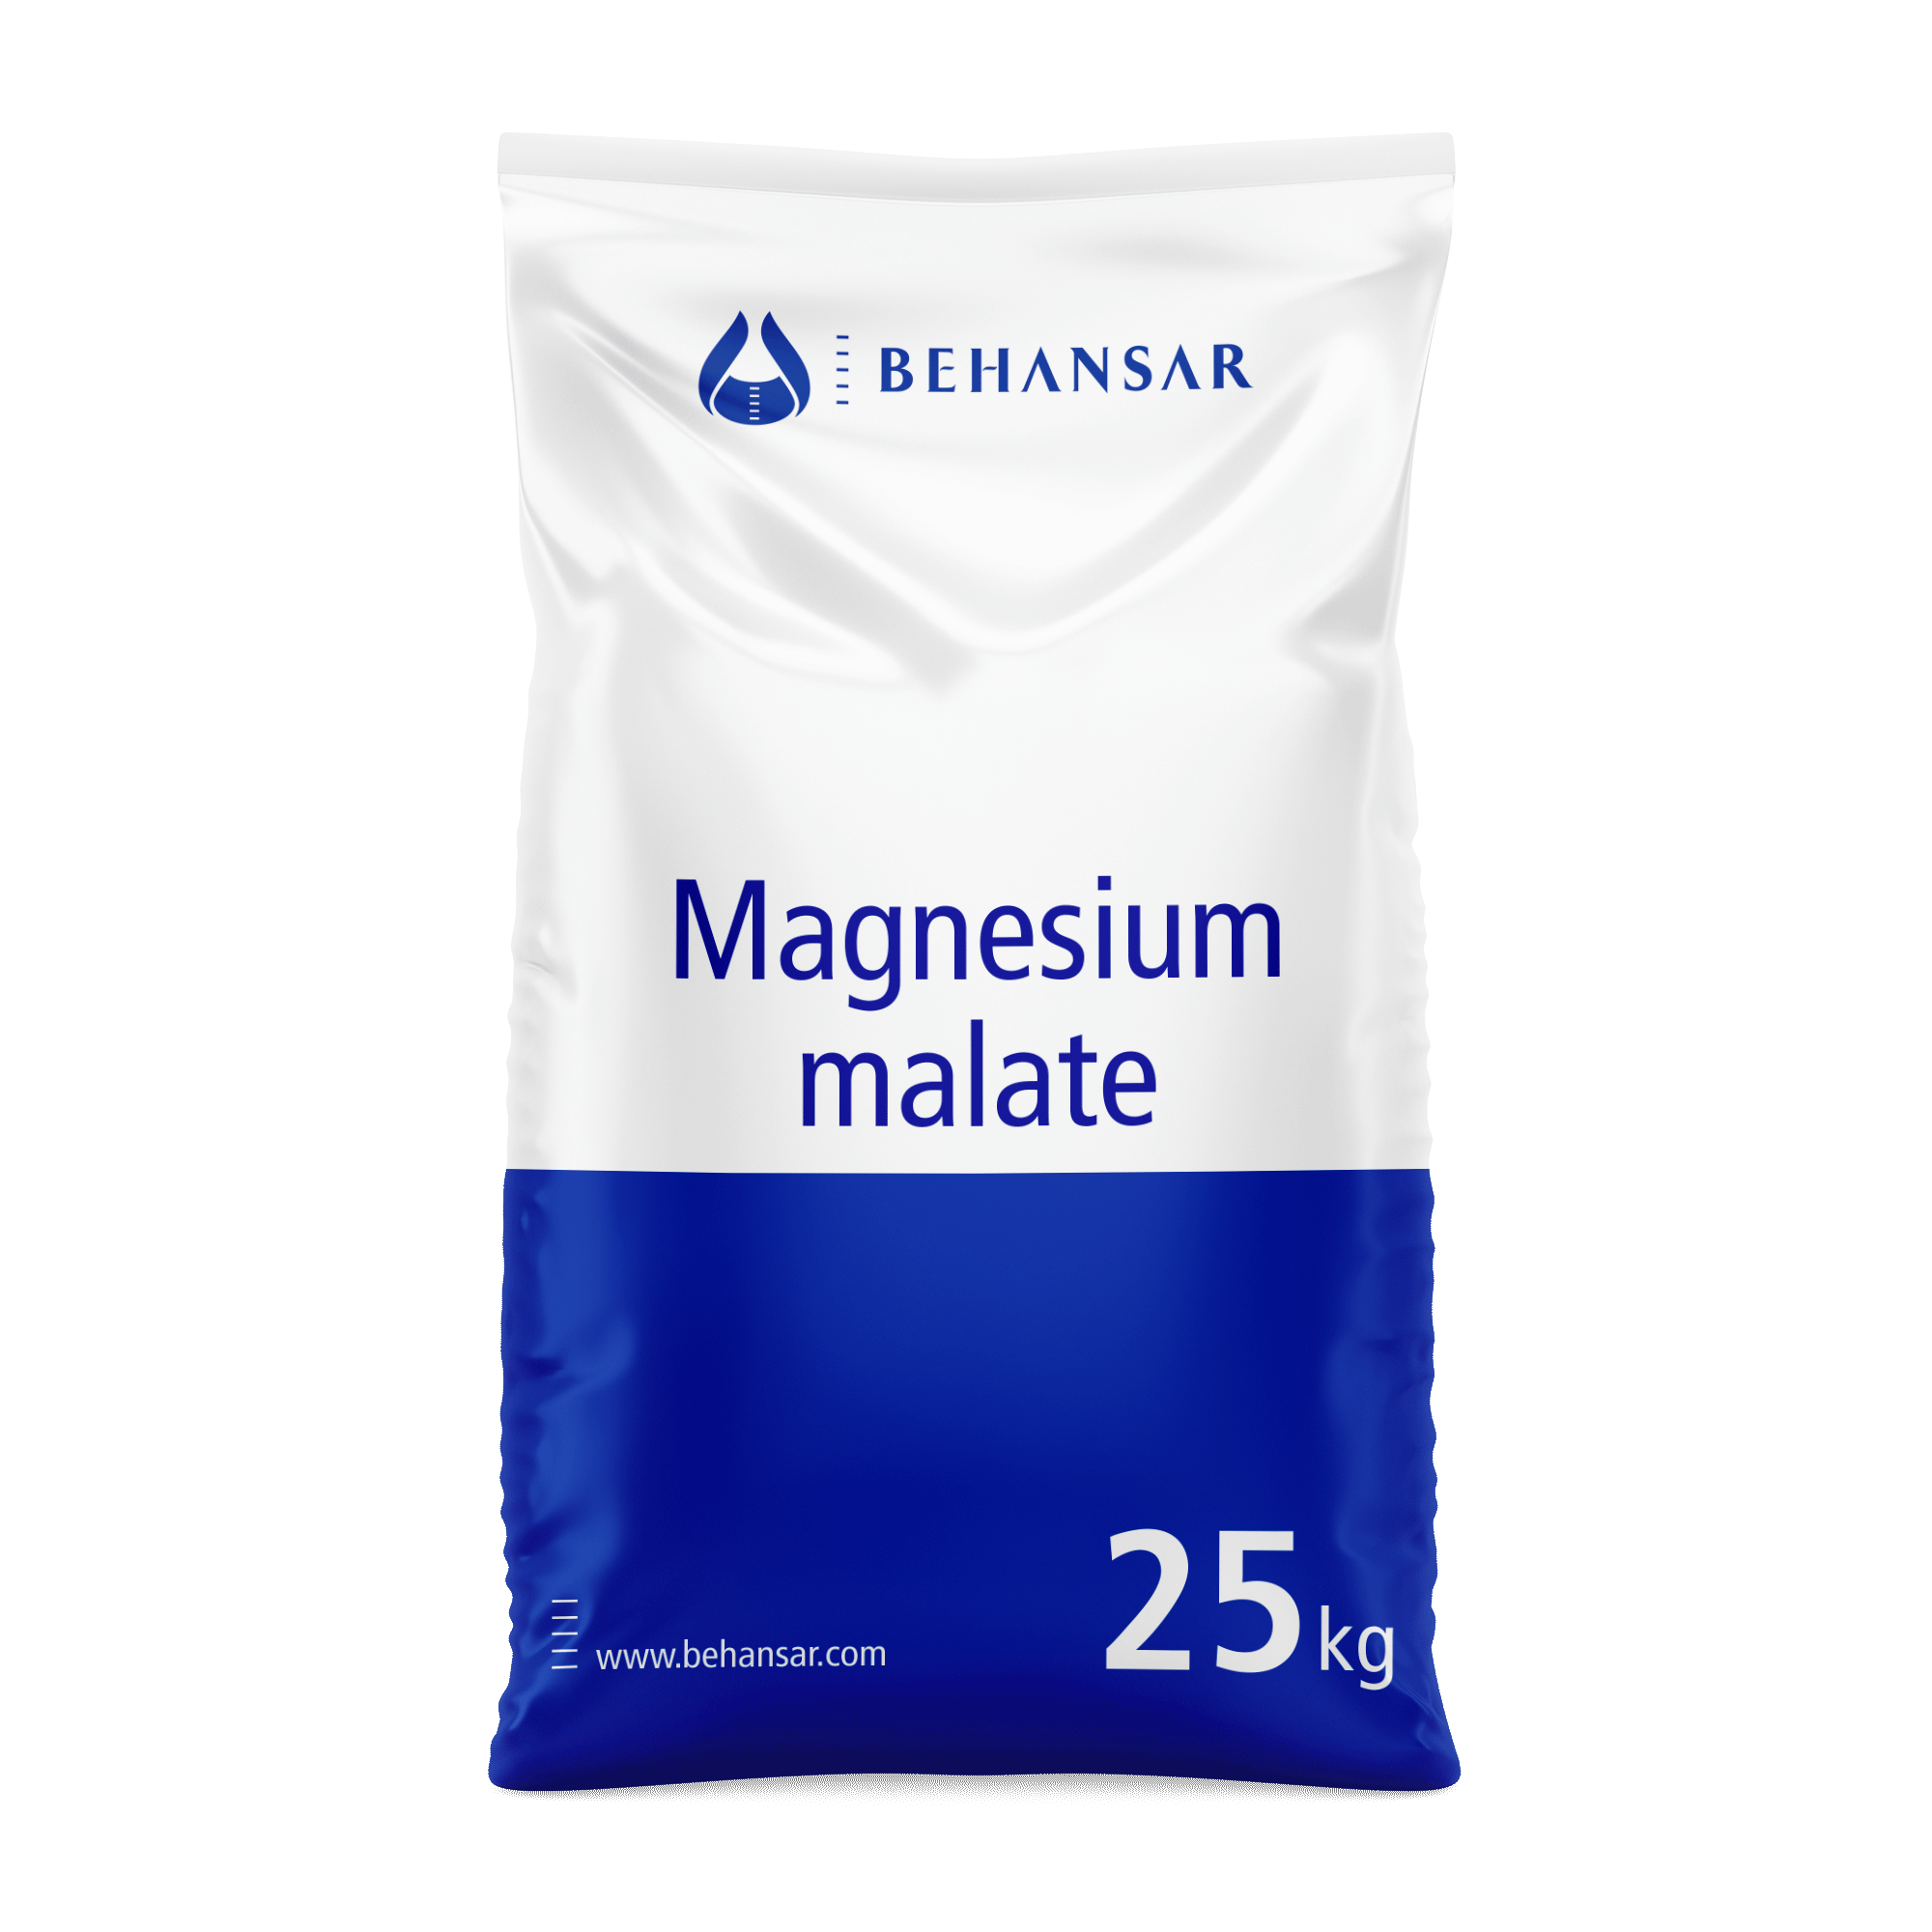 Magnesium malate is one of the products of Behansar Co